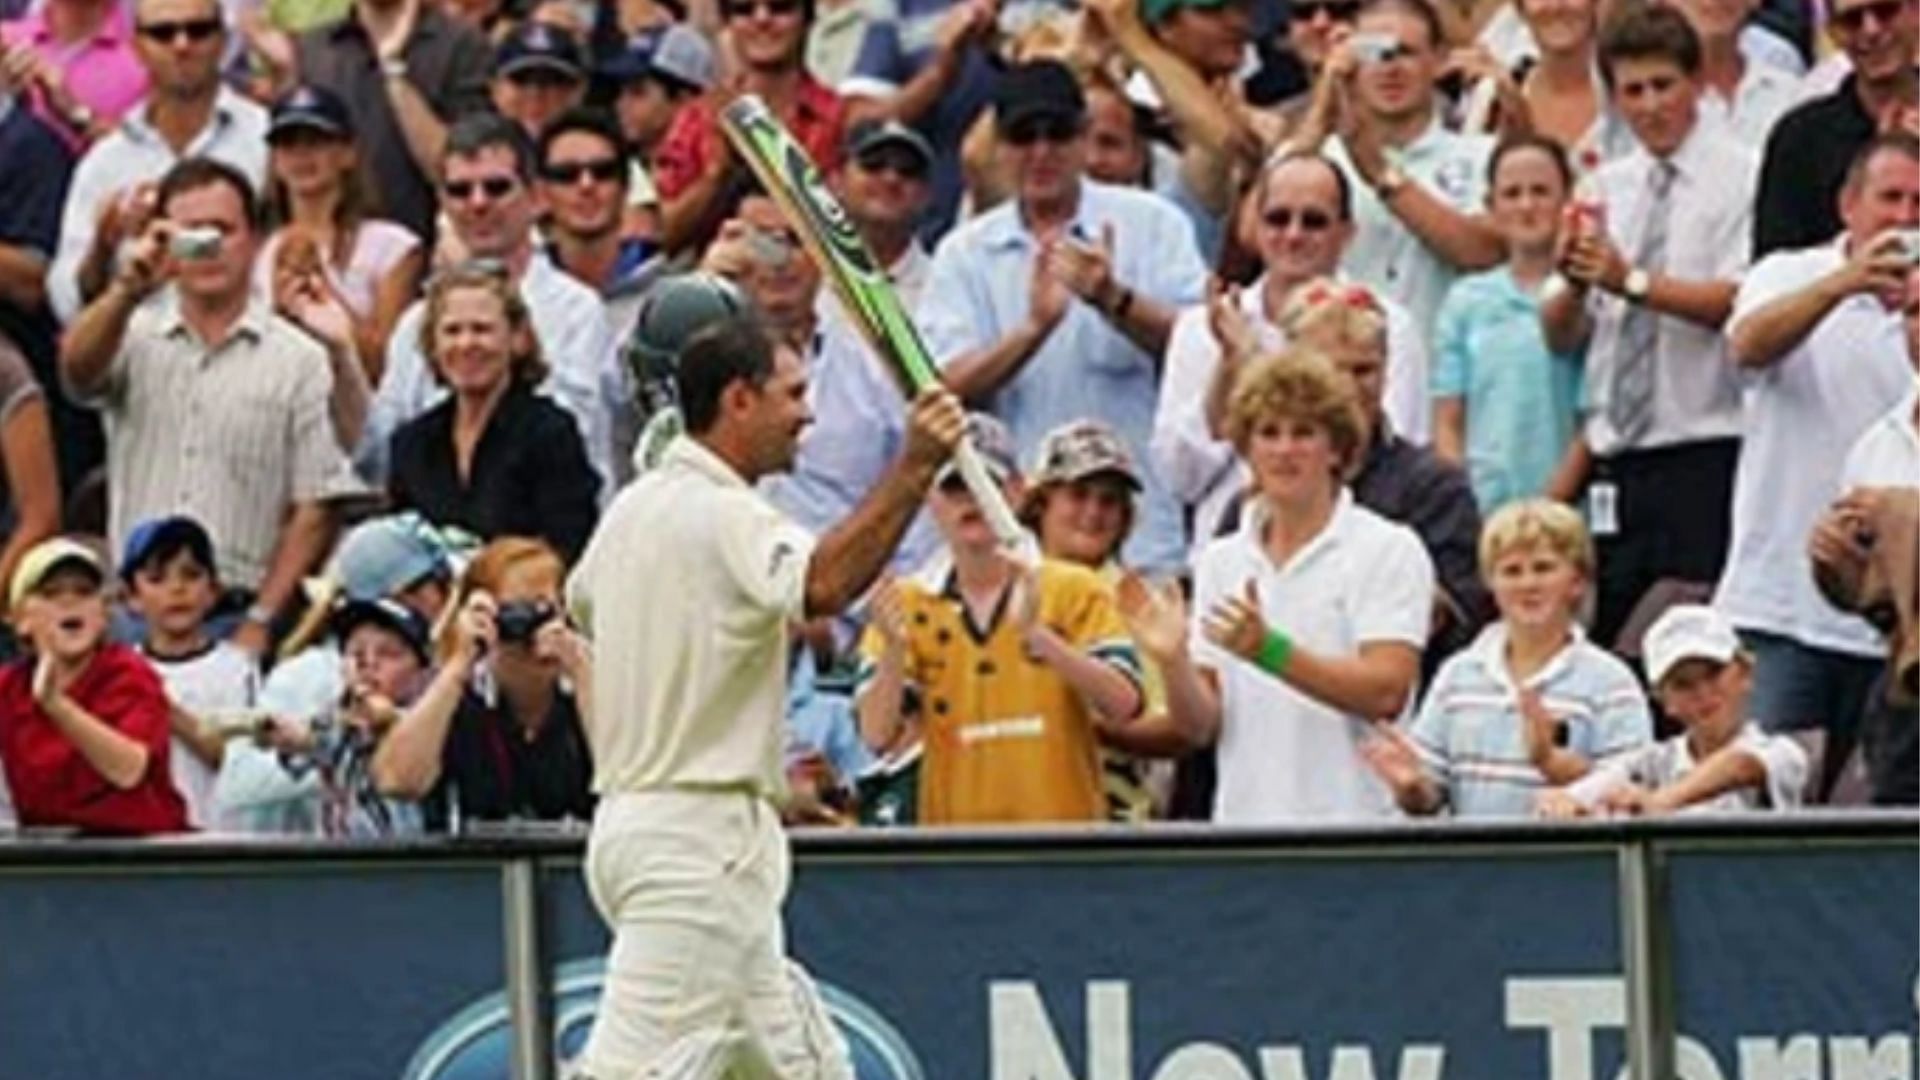 Ricky Ponting gets a standing ovation from the crowd after hitting the winning runs